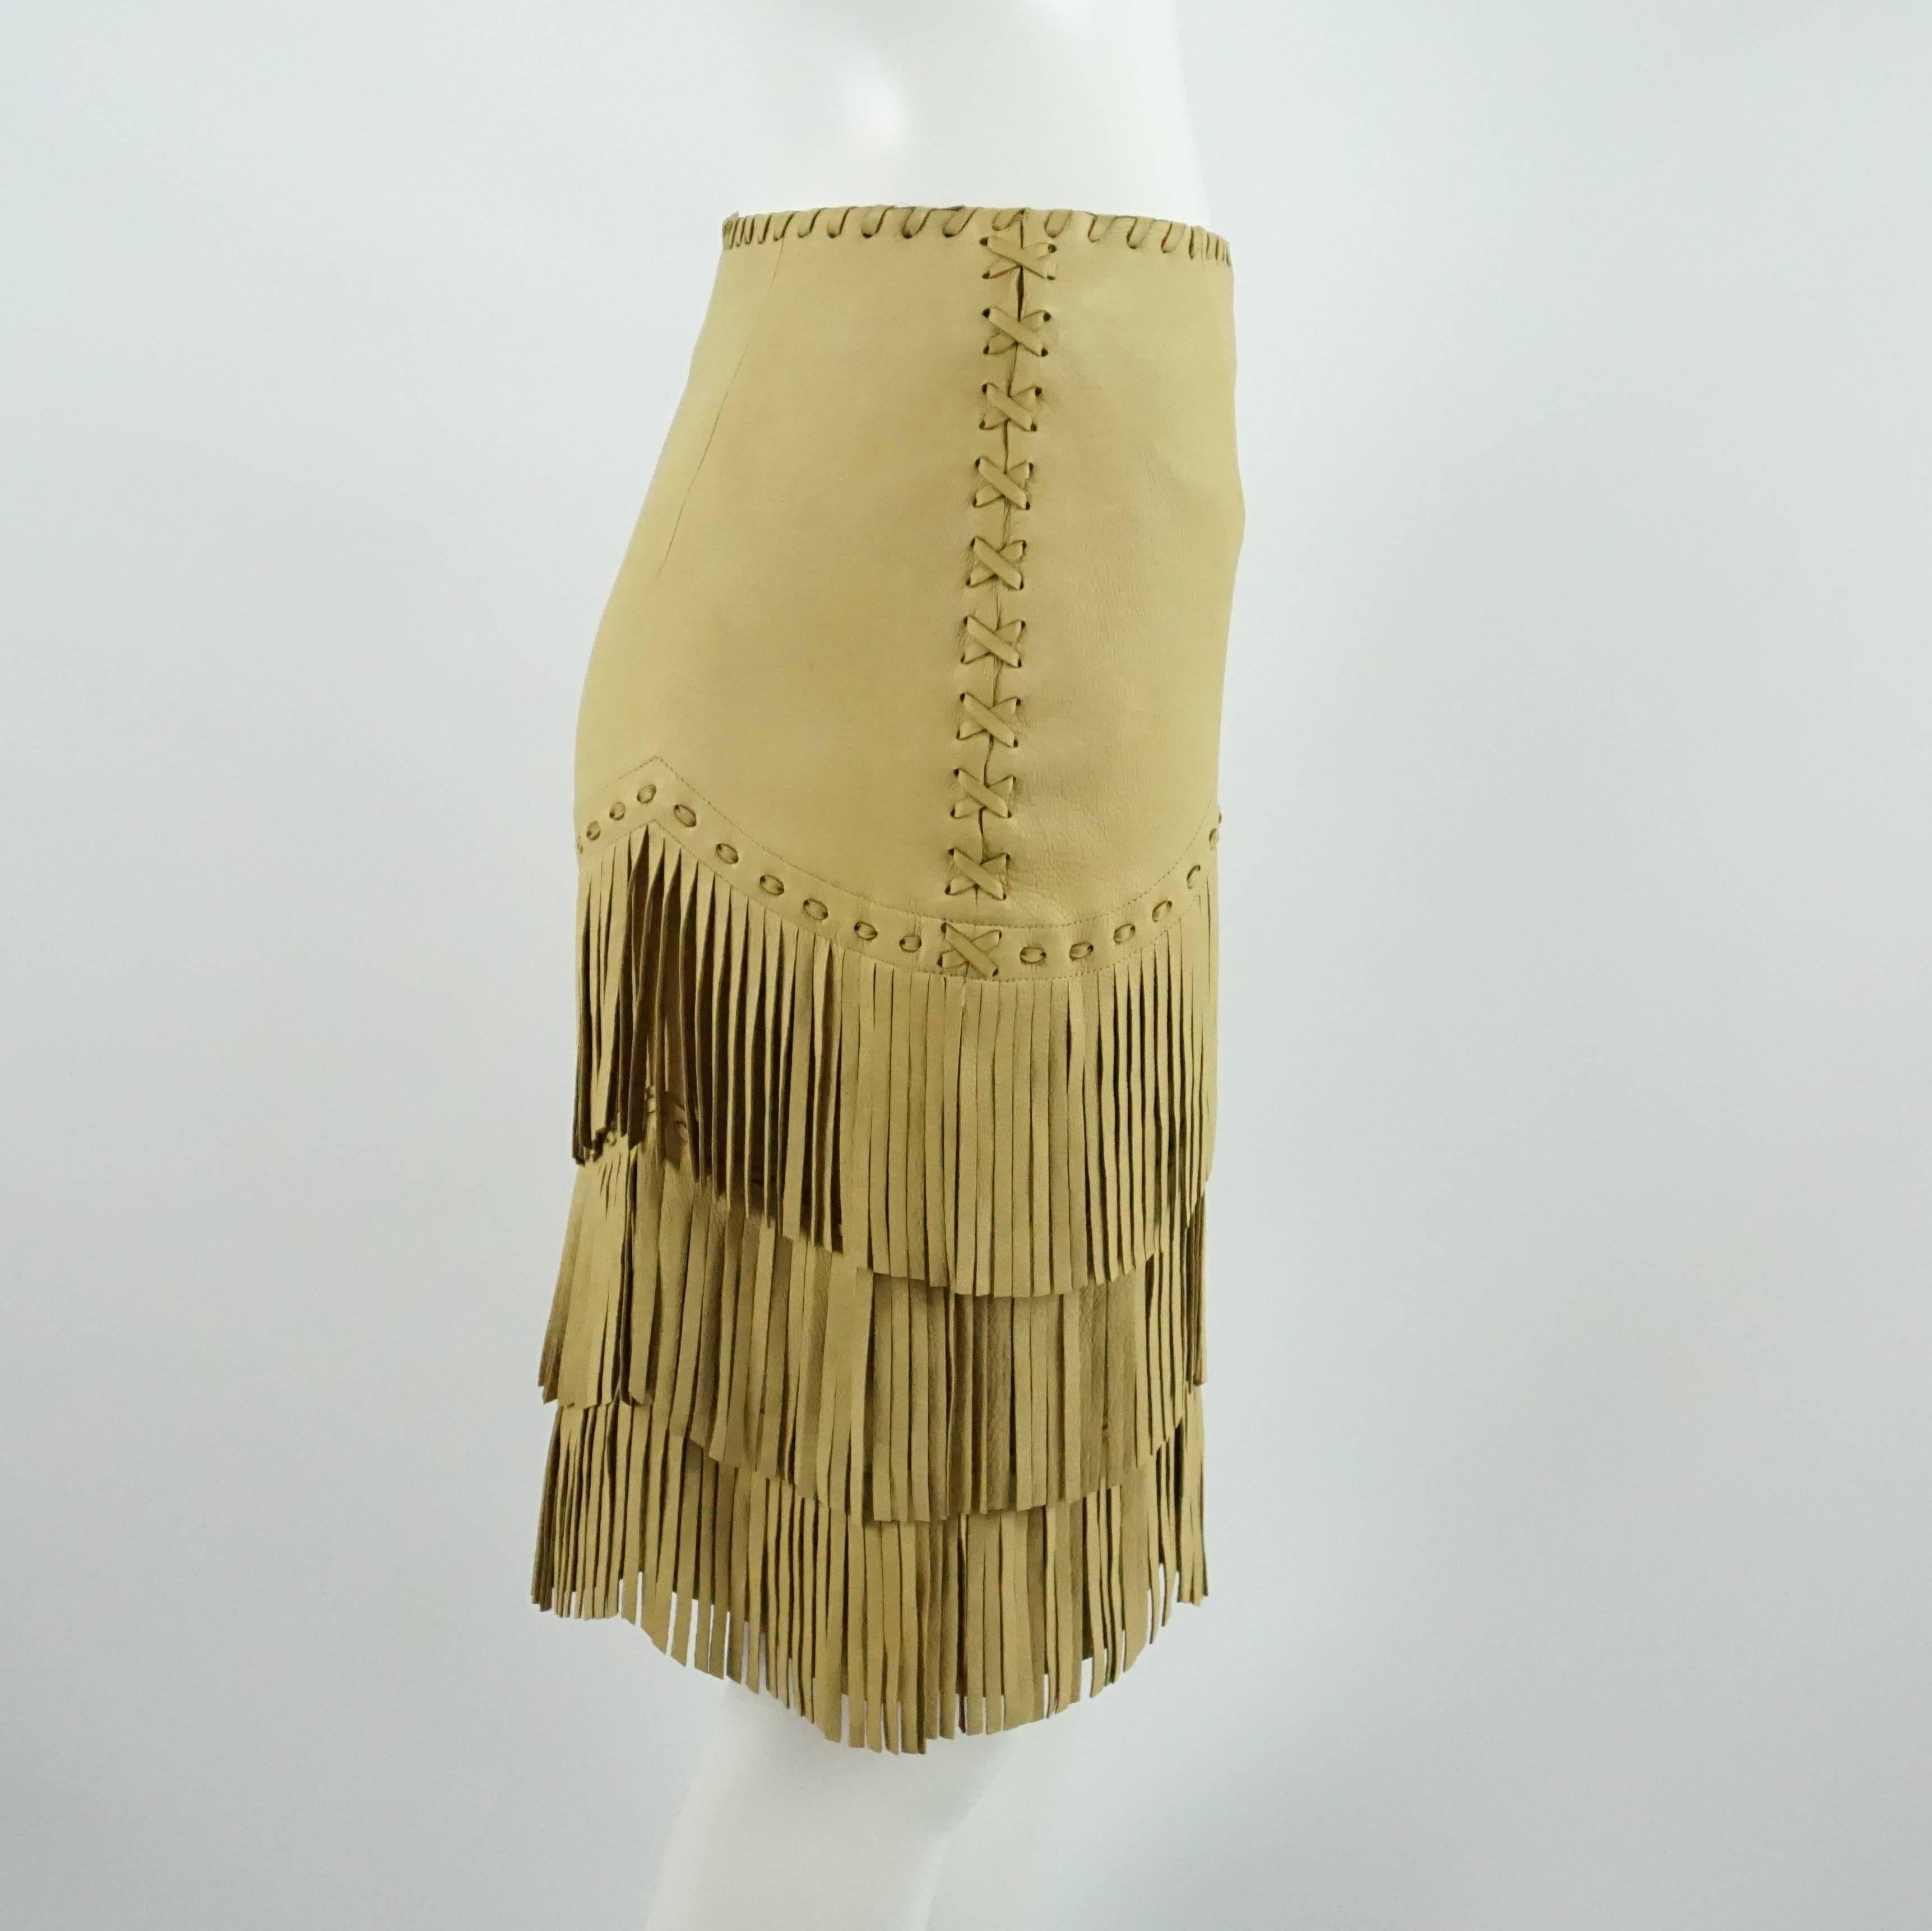 This Ralph Lauren Collection runway skirt is a fantastic piece from the 2011 collection. The leather piece has tiered fringe with a woven leather trim and wood-like buttons on the side. The skirt is in excellent condition with light wear on the